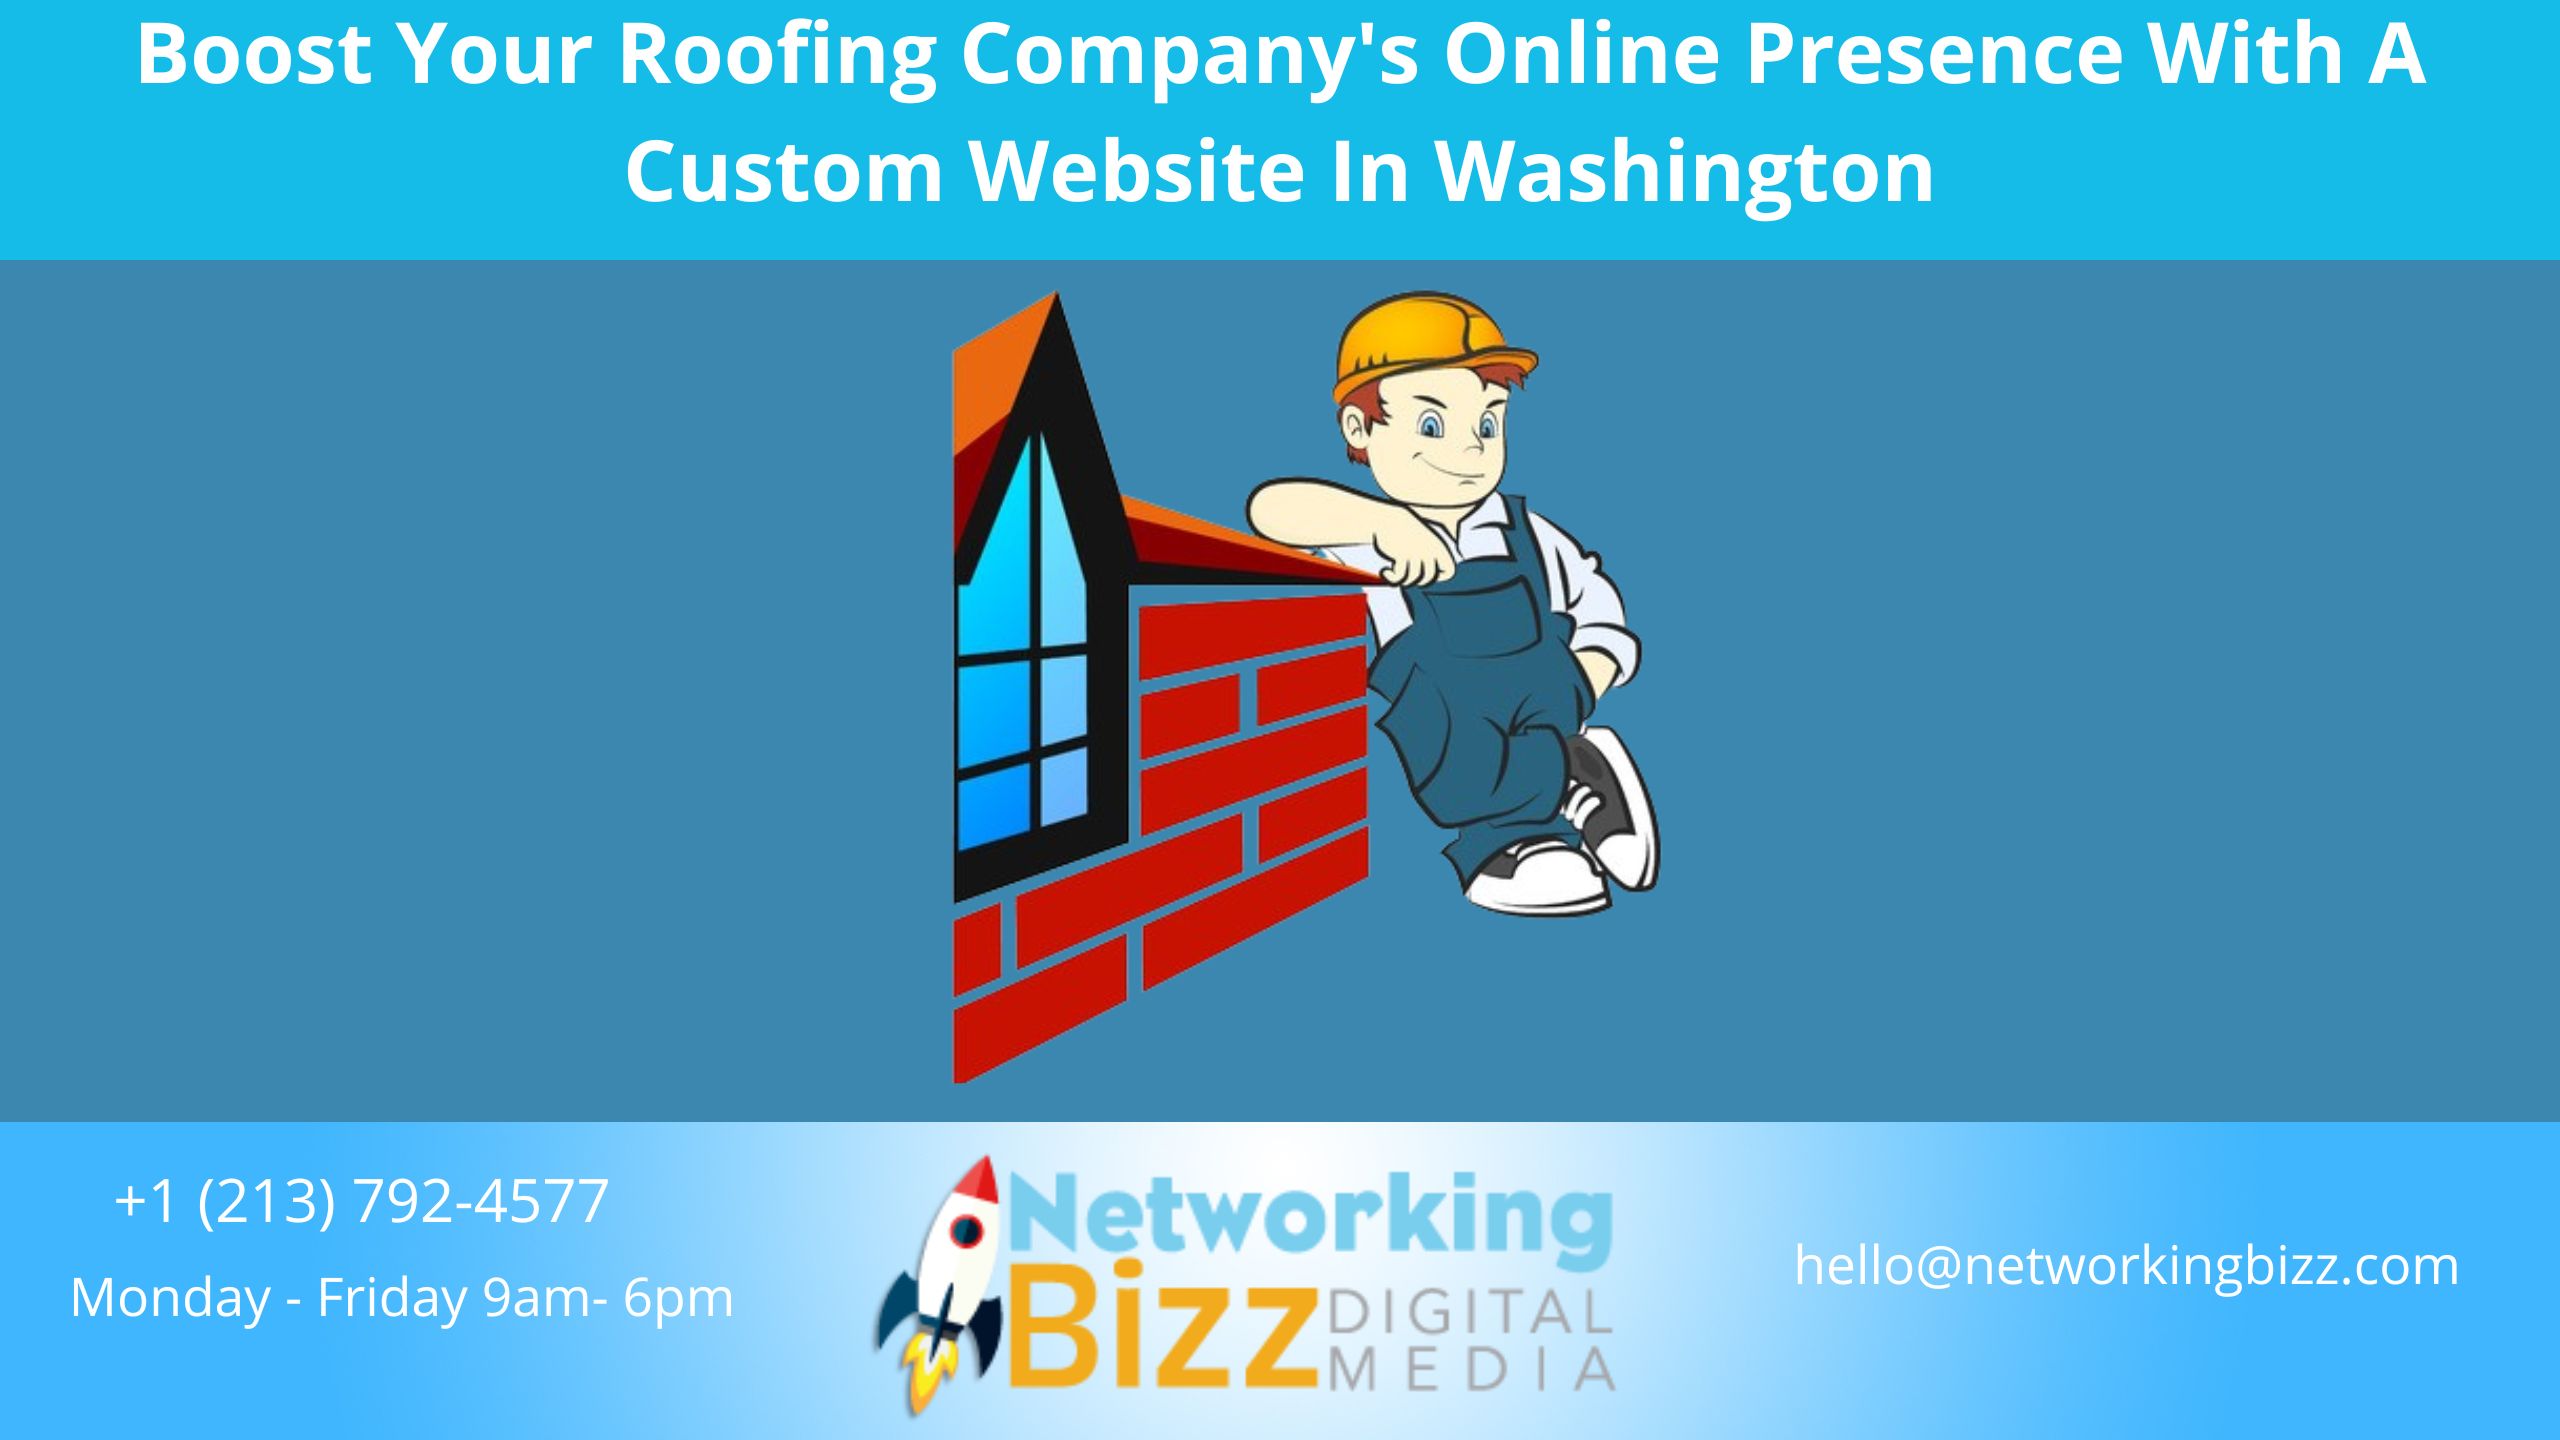 Boost Your Roofing Company’s Online Presence With A Custom Website In Washington